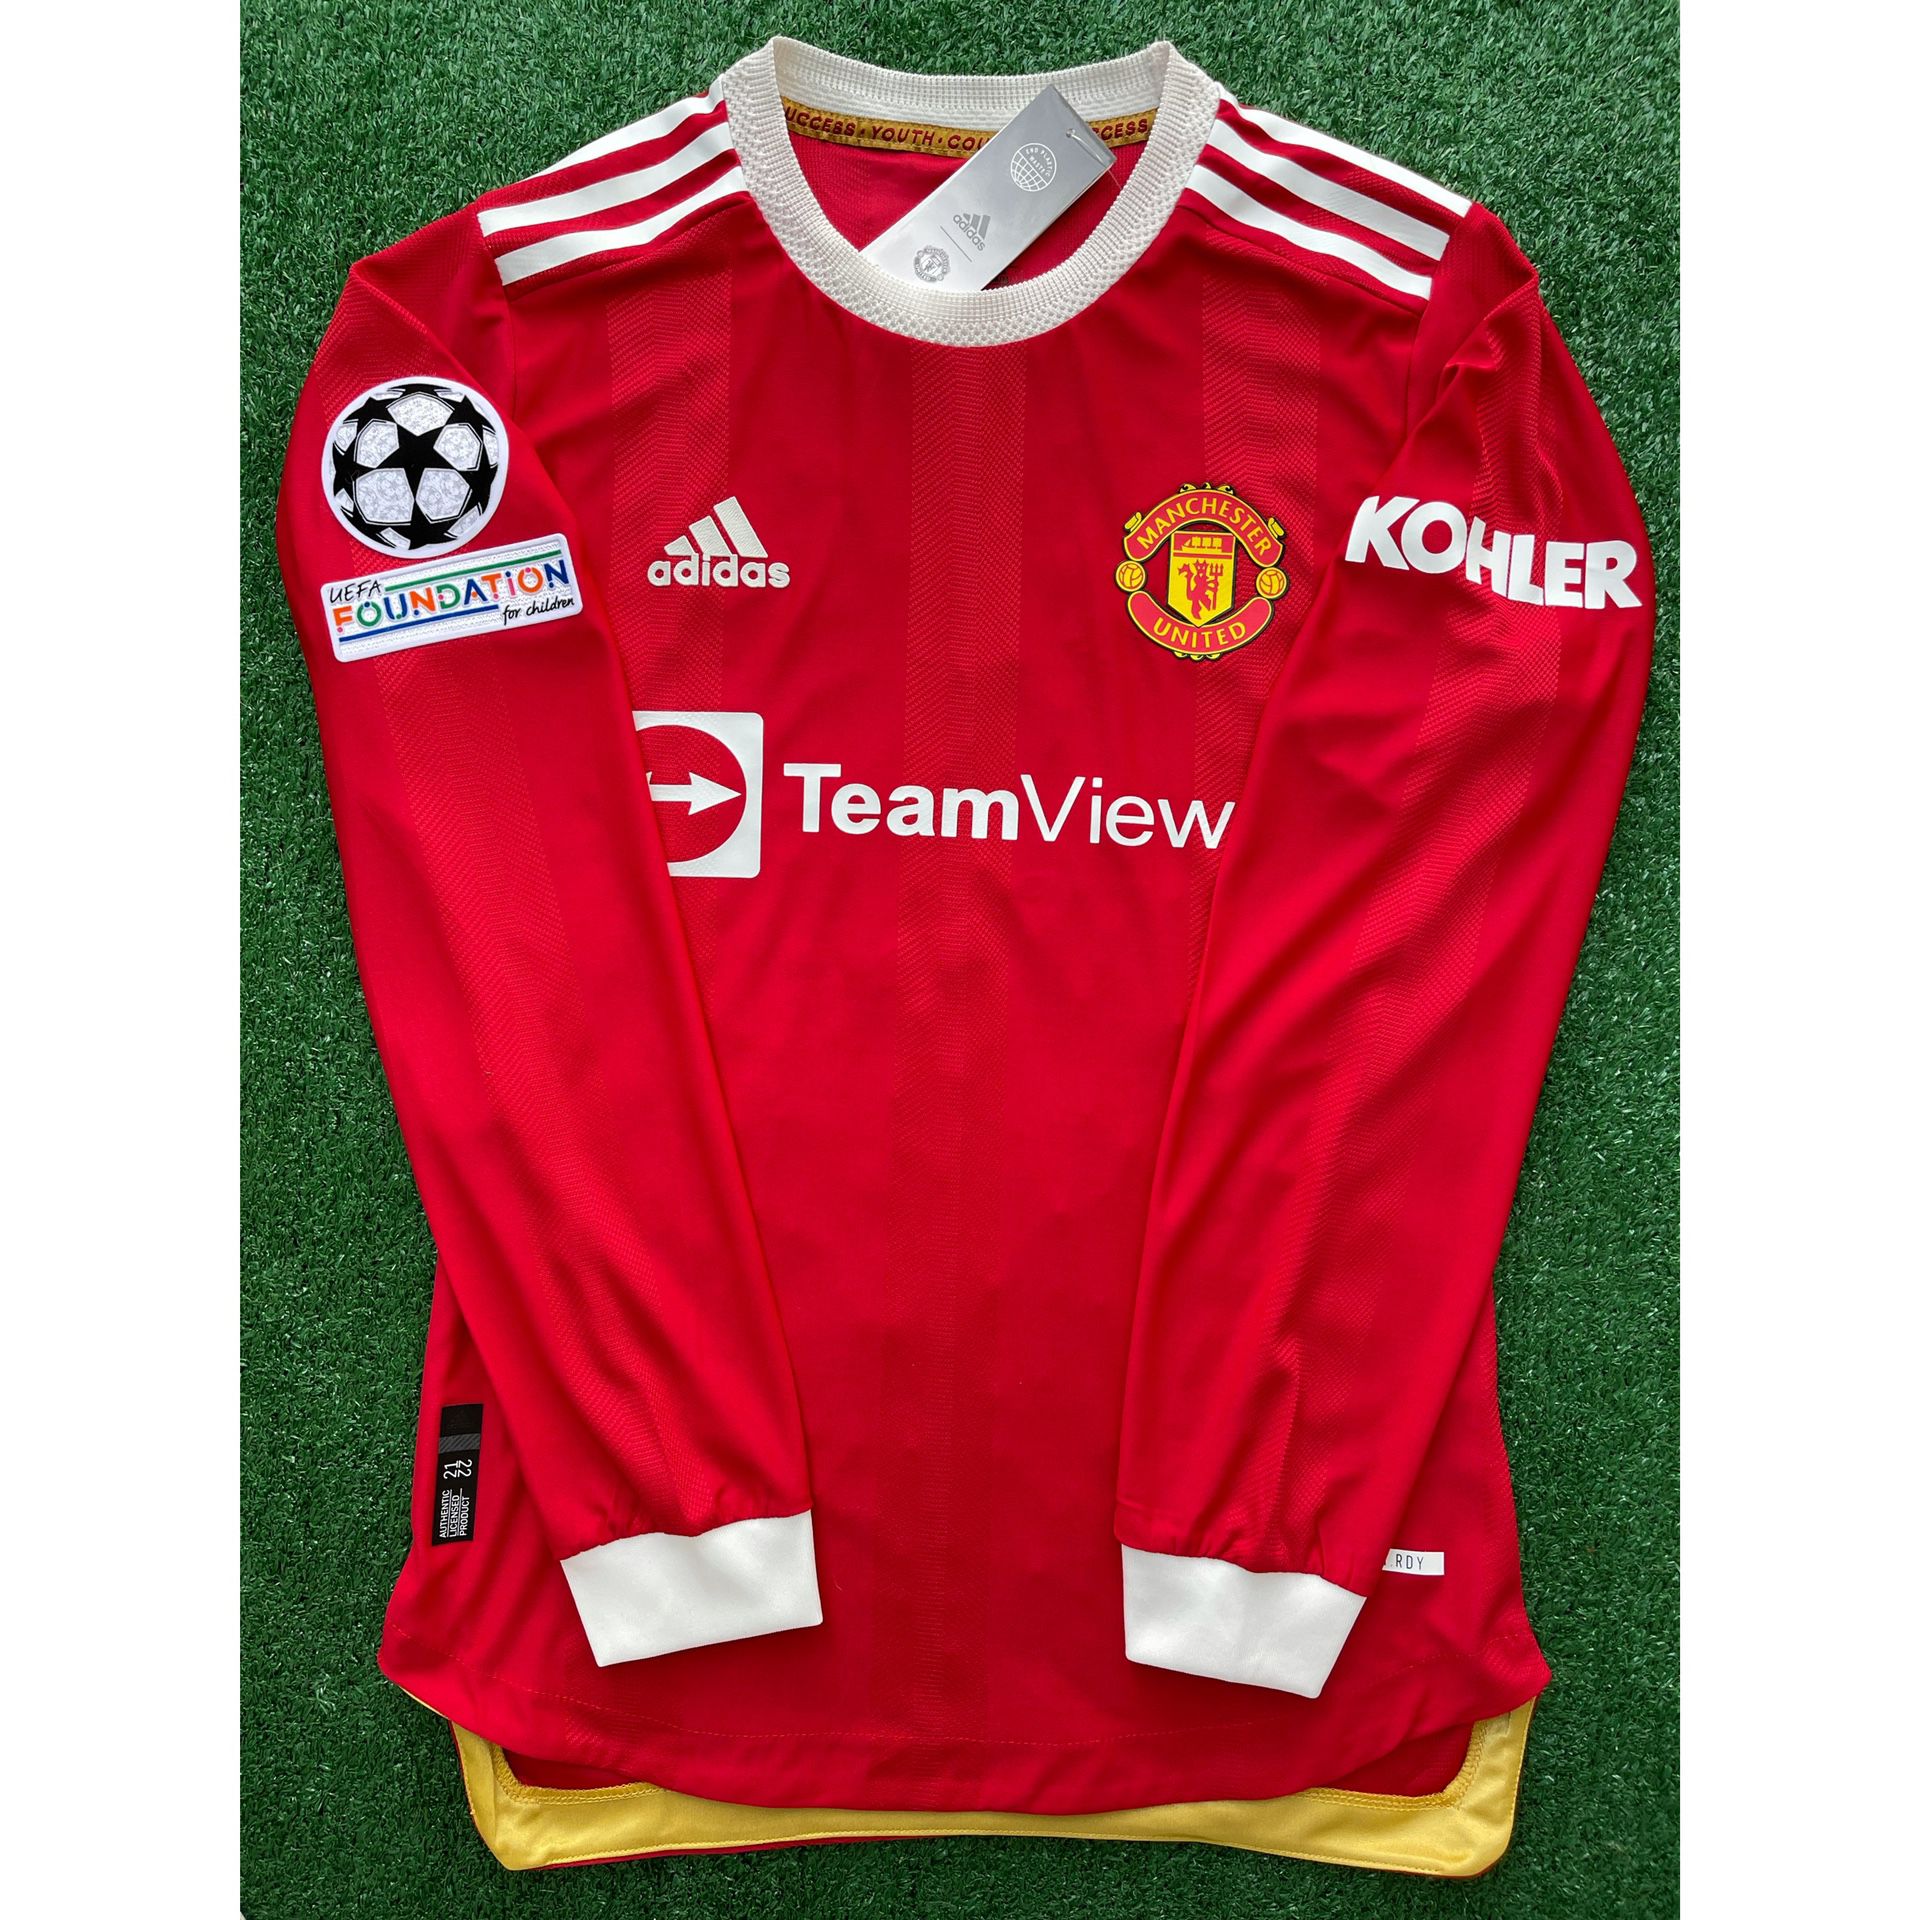 2021/22 Manchester United long sleeve soccer jersey player version